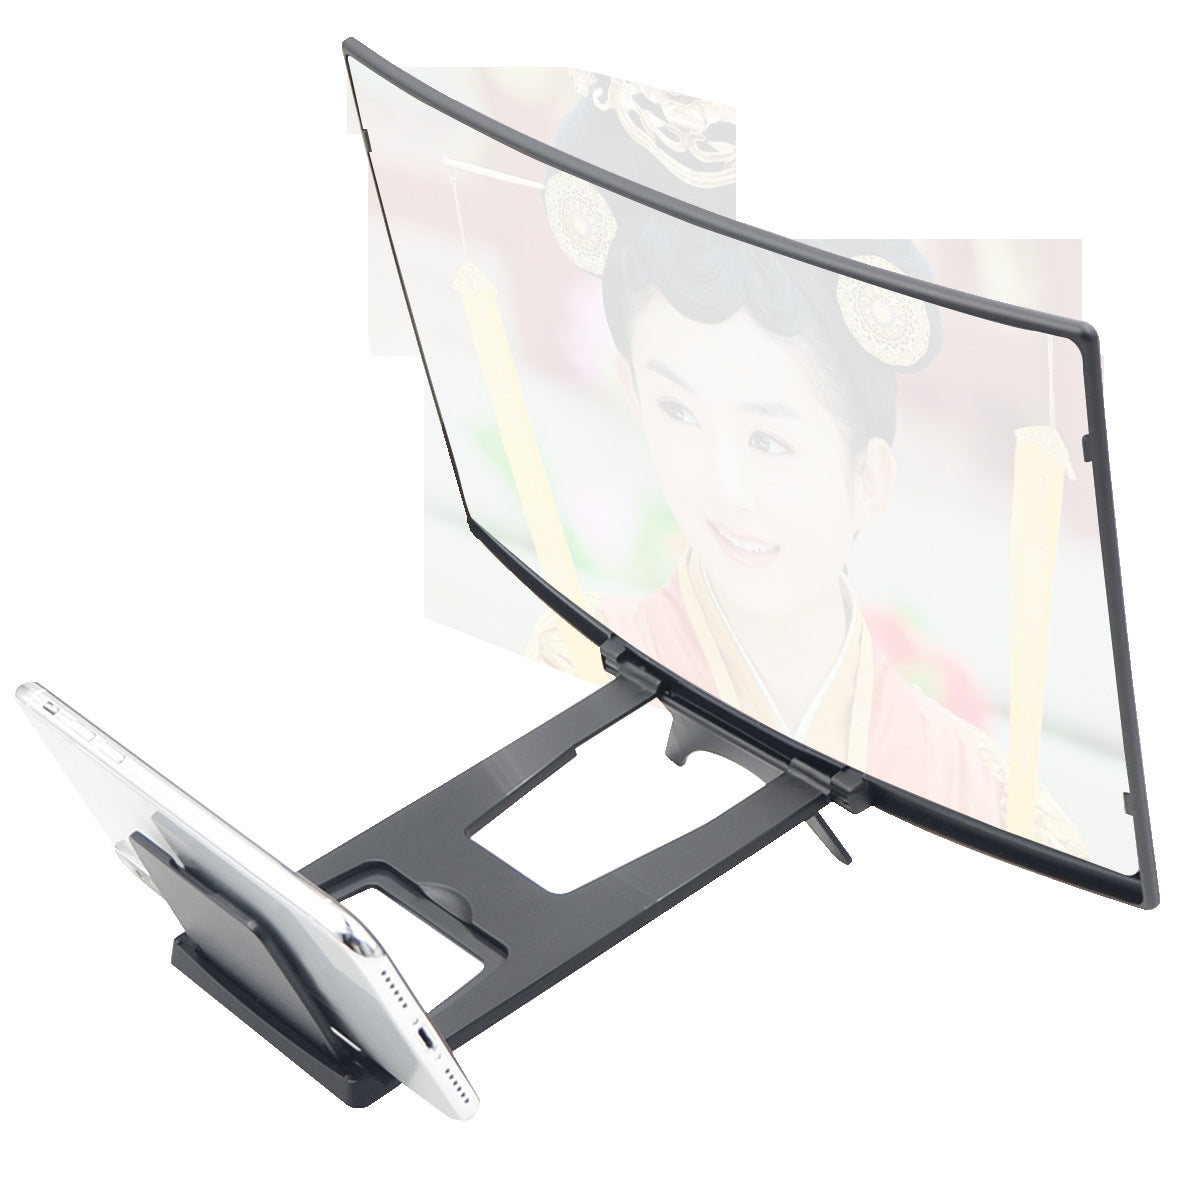 Mobile Phone Amplifier 12-inch Curved Mobile Phone Screen Amplifier